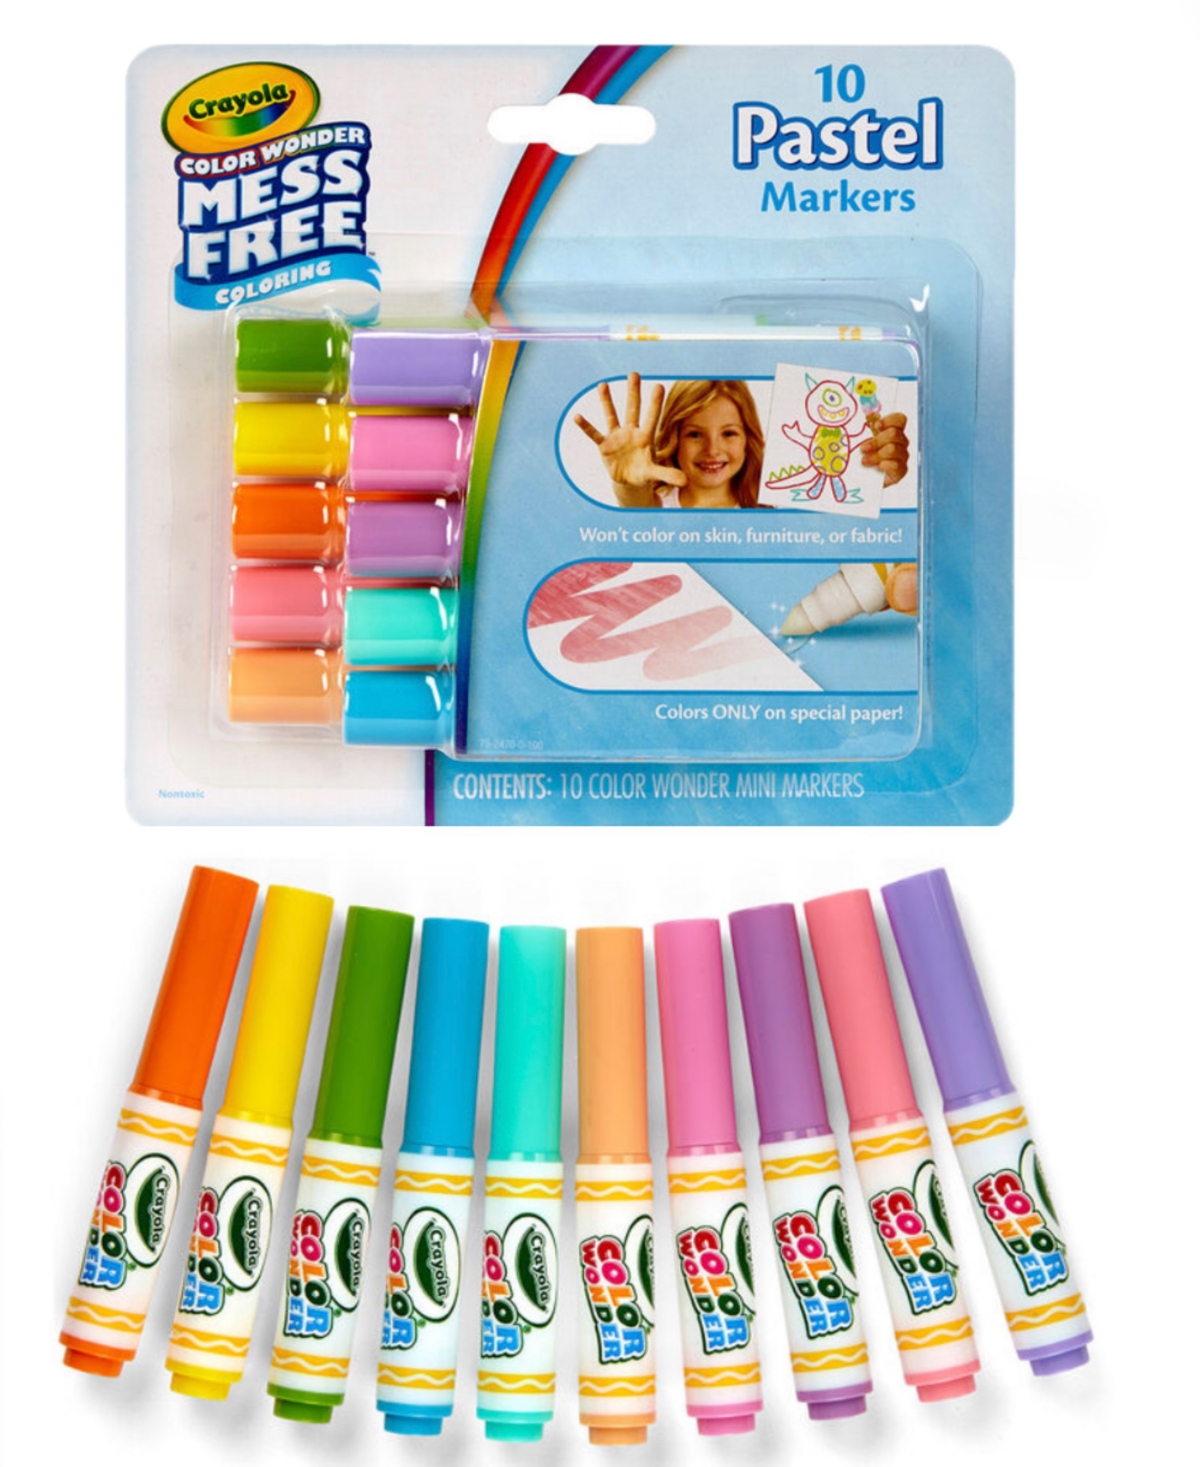 Crayola- Keep Me Mess Free- Pastel Markers 10ct - Multi Colored